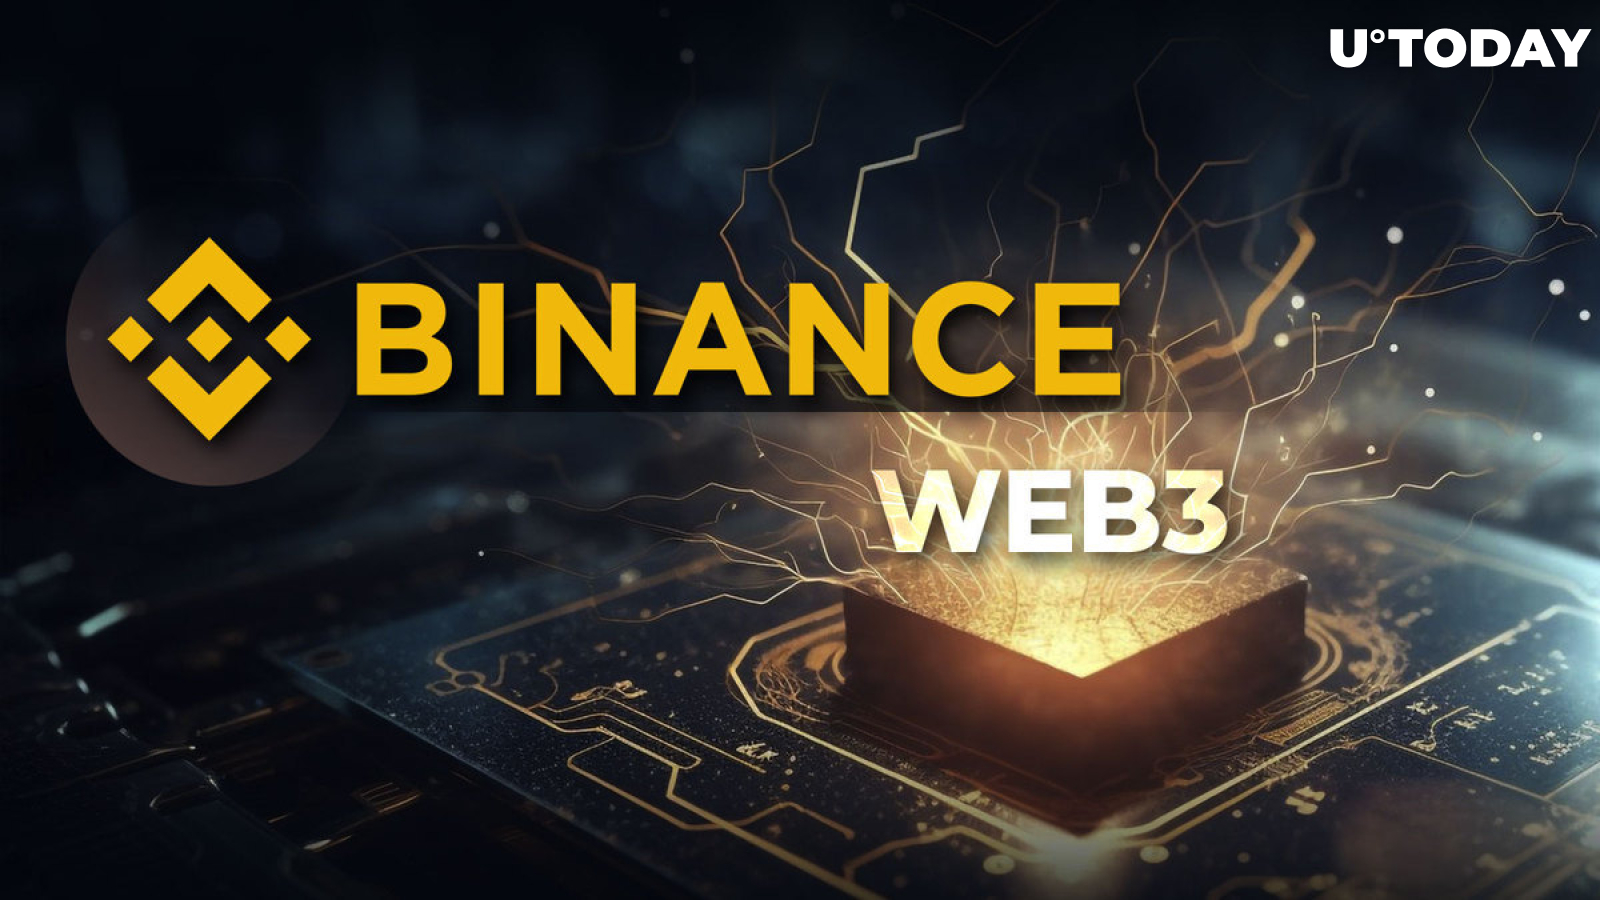 Binance Web3 Wallet Now Supports Simple Yield, Yield Plus Earning Modules